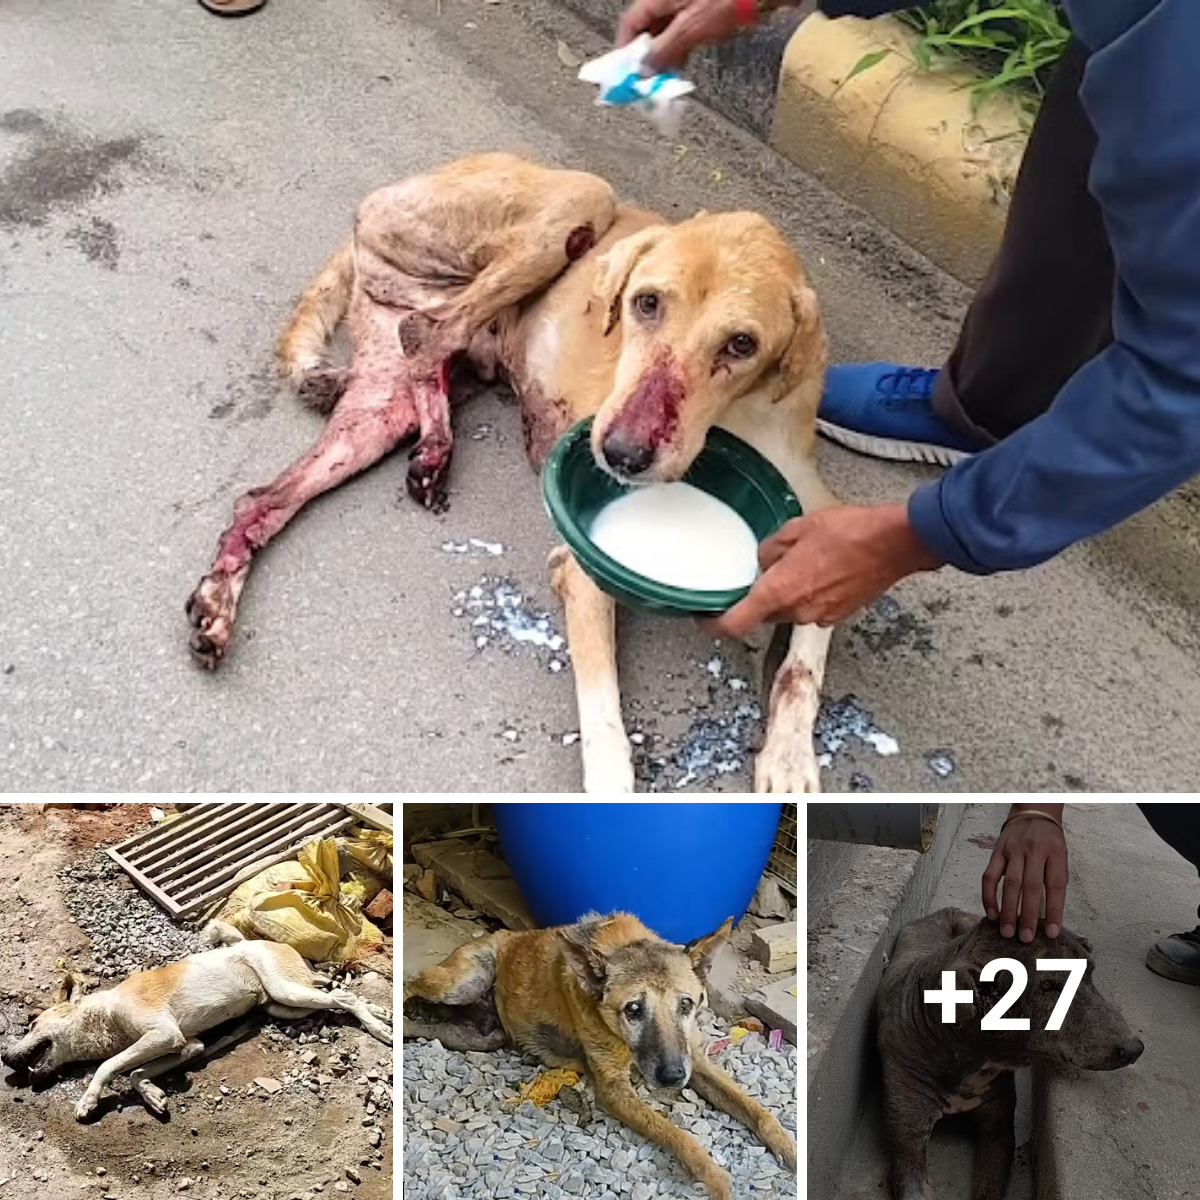 In a scene straight out of a fairy tale, old street dogs with serious injuries recover amazingly well and overcome all obstacles to begin new lives.